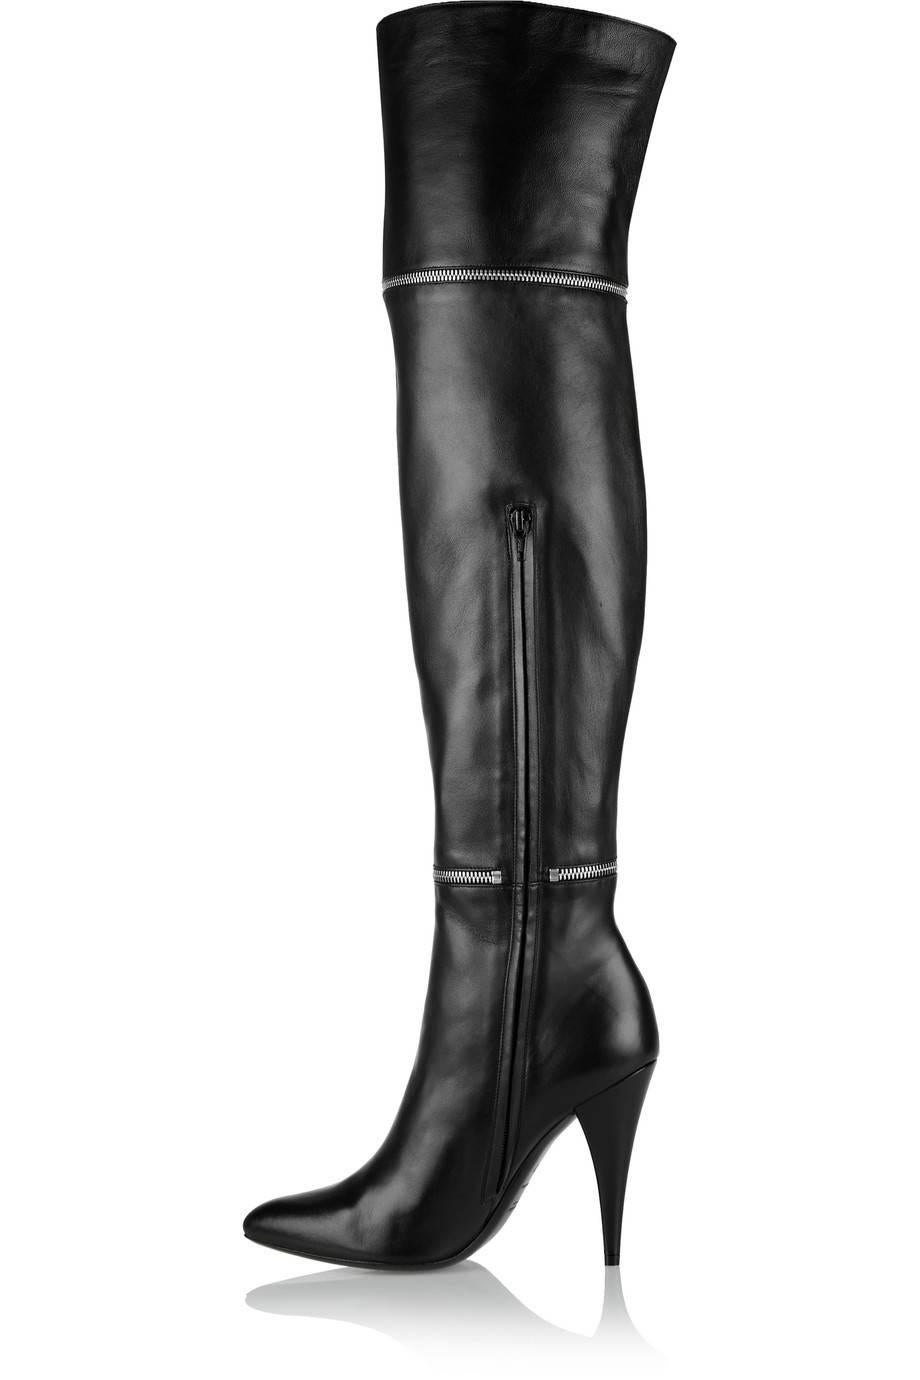 CURATOR'S NOTES

Saint Laurent NEW Black Leather Zipper Over the Knee Heels Boots in Box  

Size IT 36
Leather
Silver hardware
Zipper closure
Leather lining
Made in Italy
Heel height 4"
Includes original Saint Laurent box